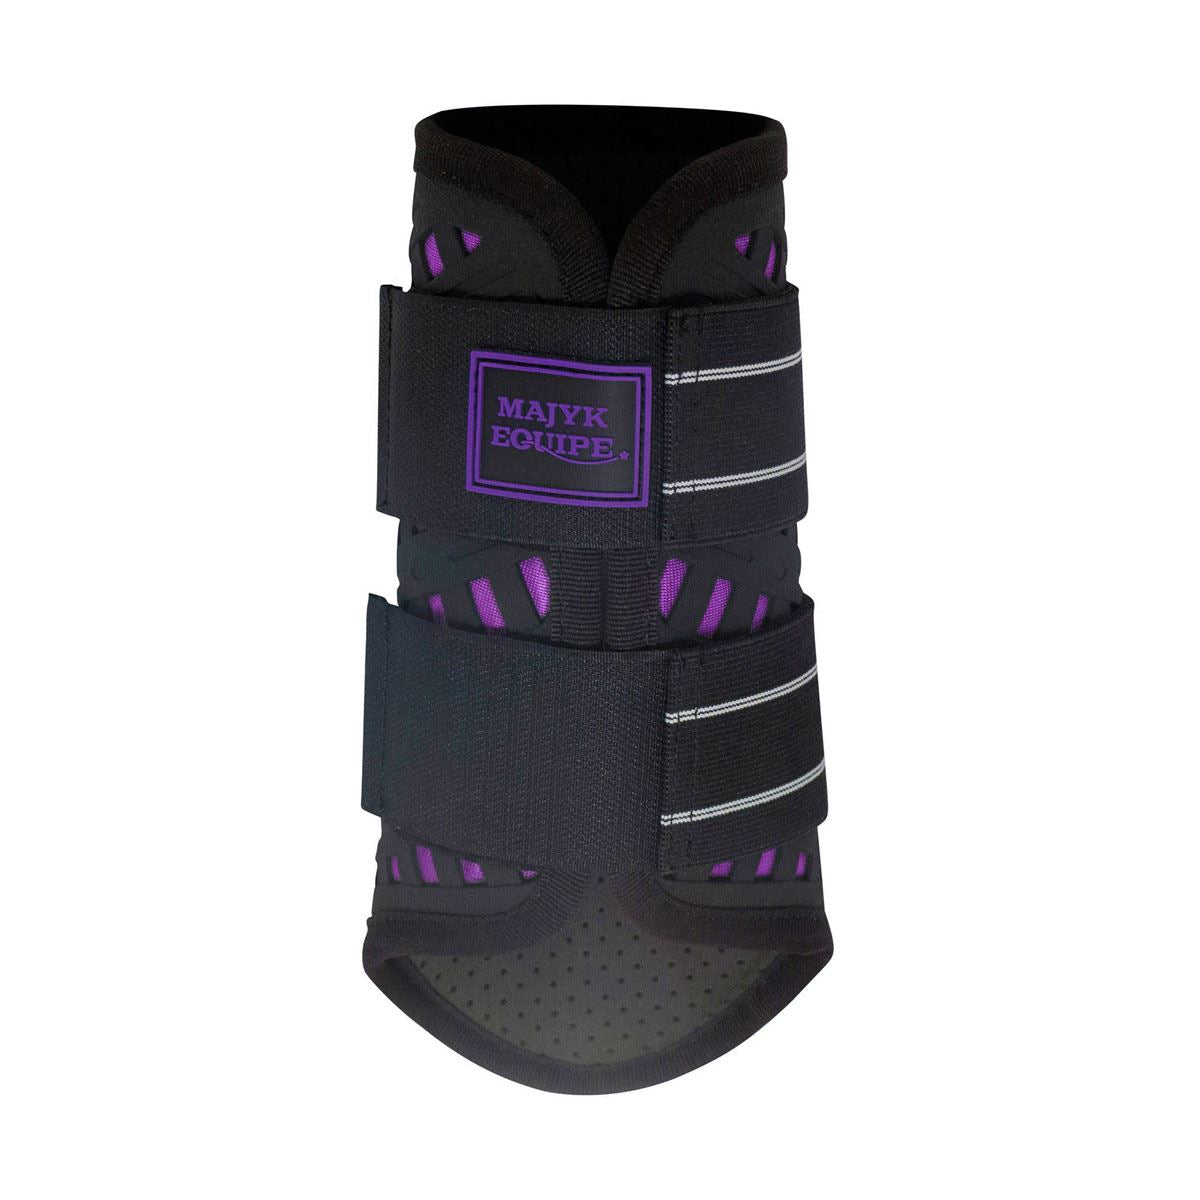 Majyk Equipe Sport/Dressage Boot - Just Horse Riders